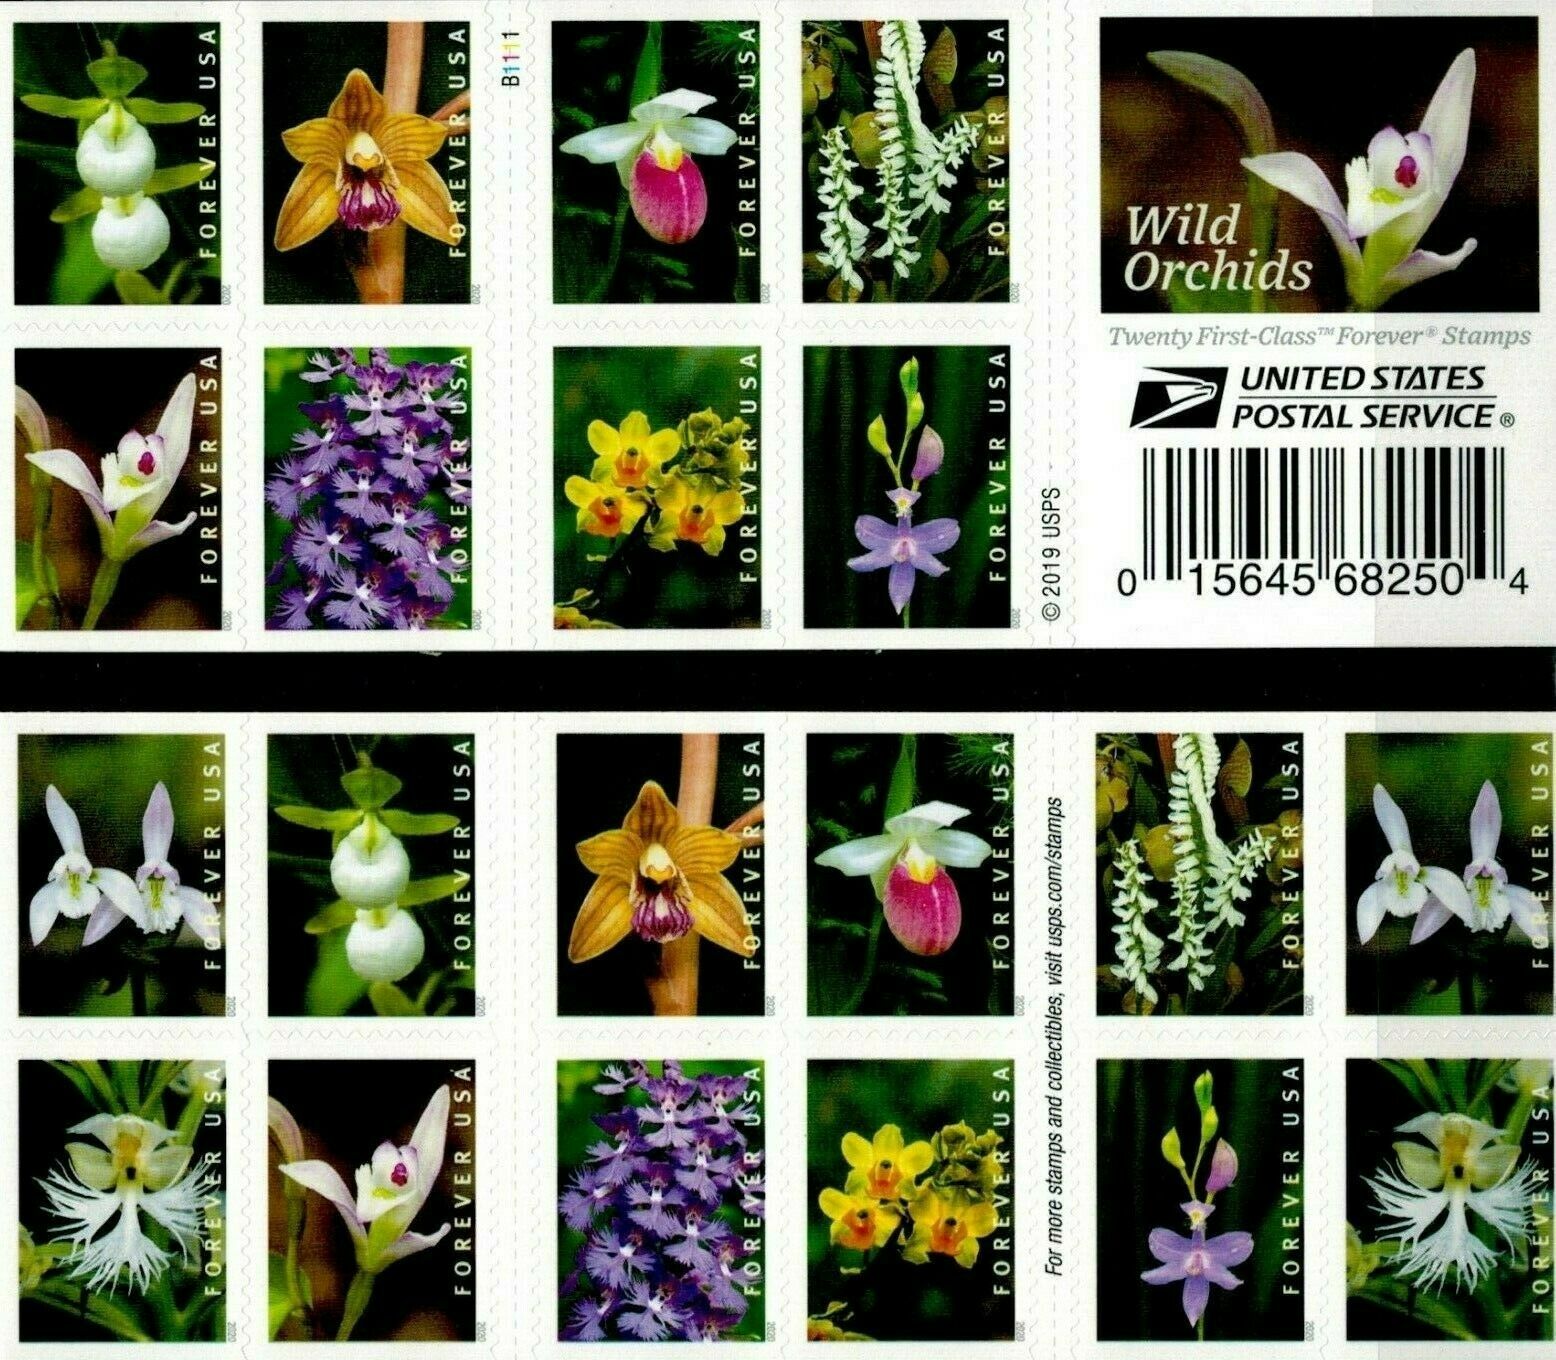 5445-54 (5454a)  Forever Wild Orchids Booklet of 20 #5454anh